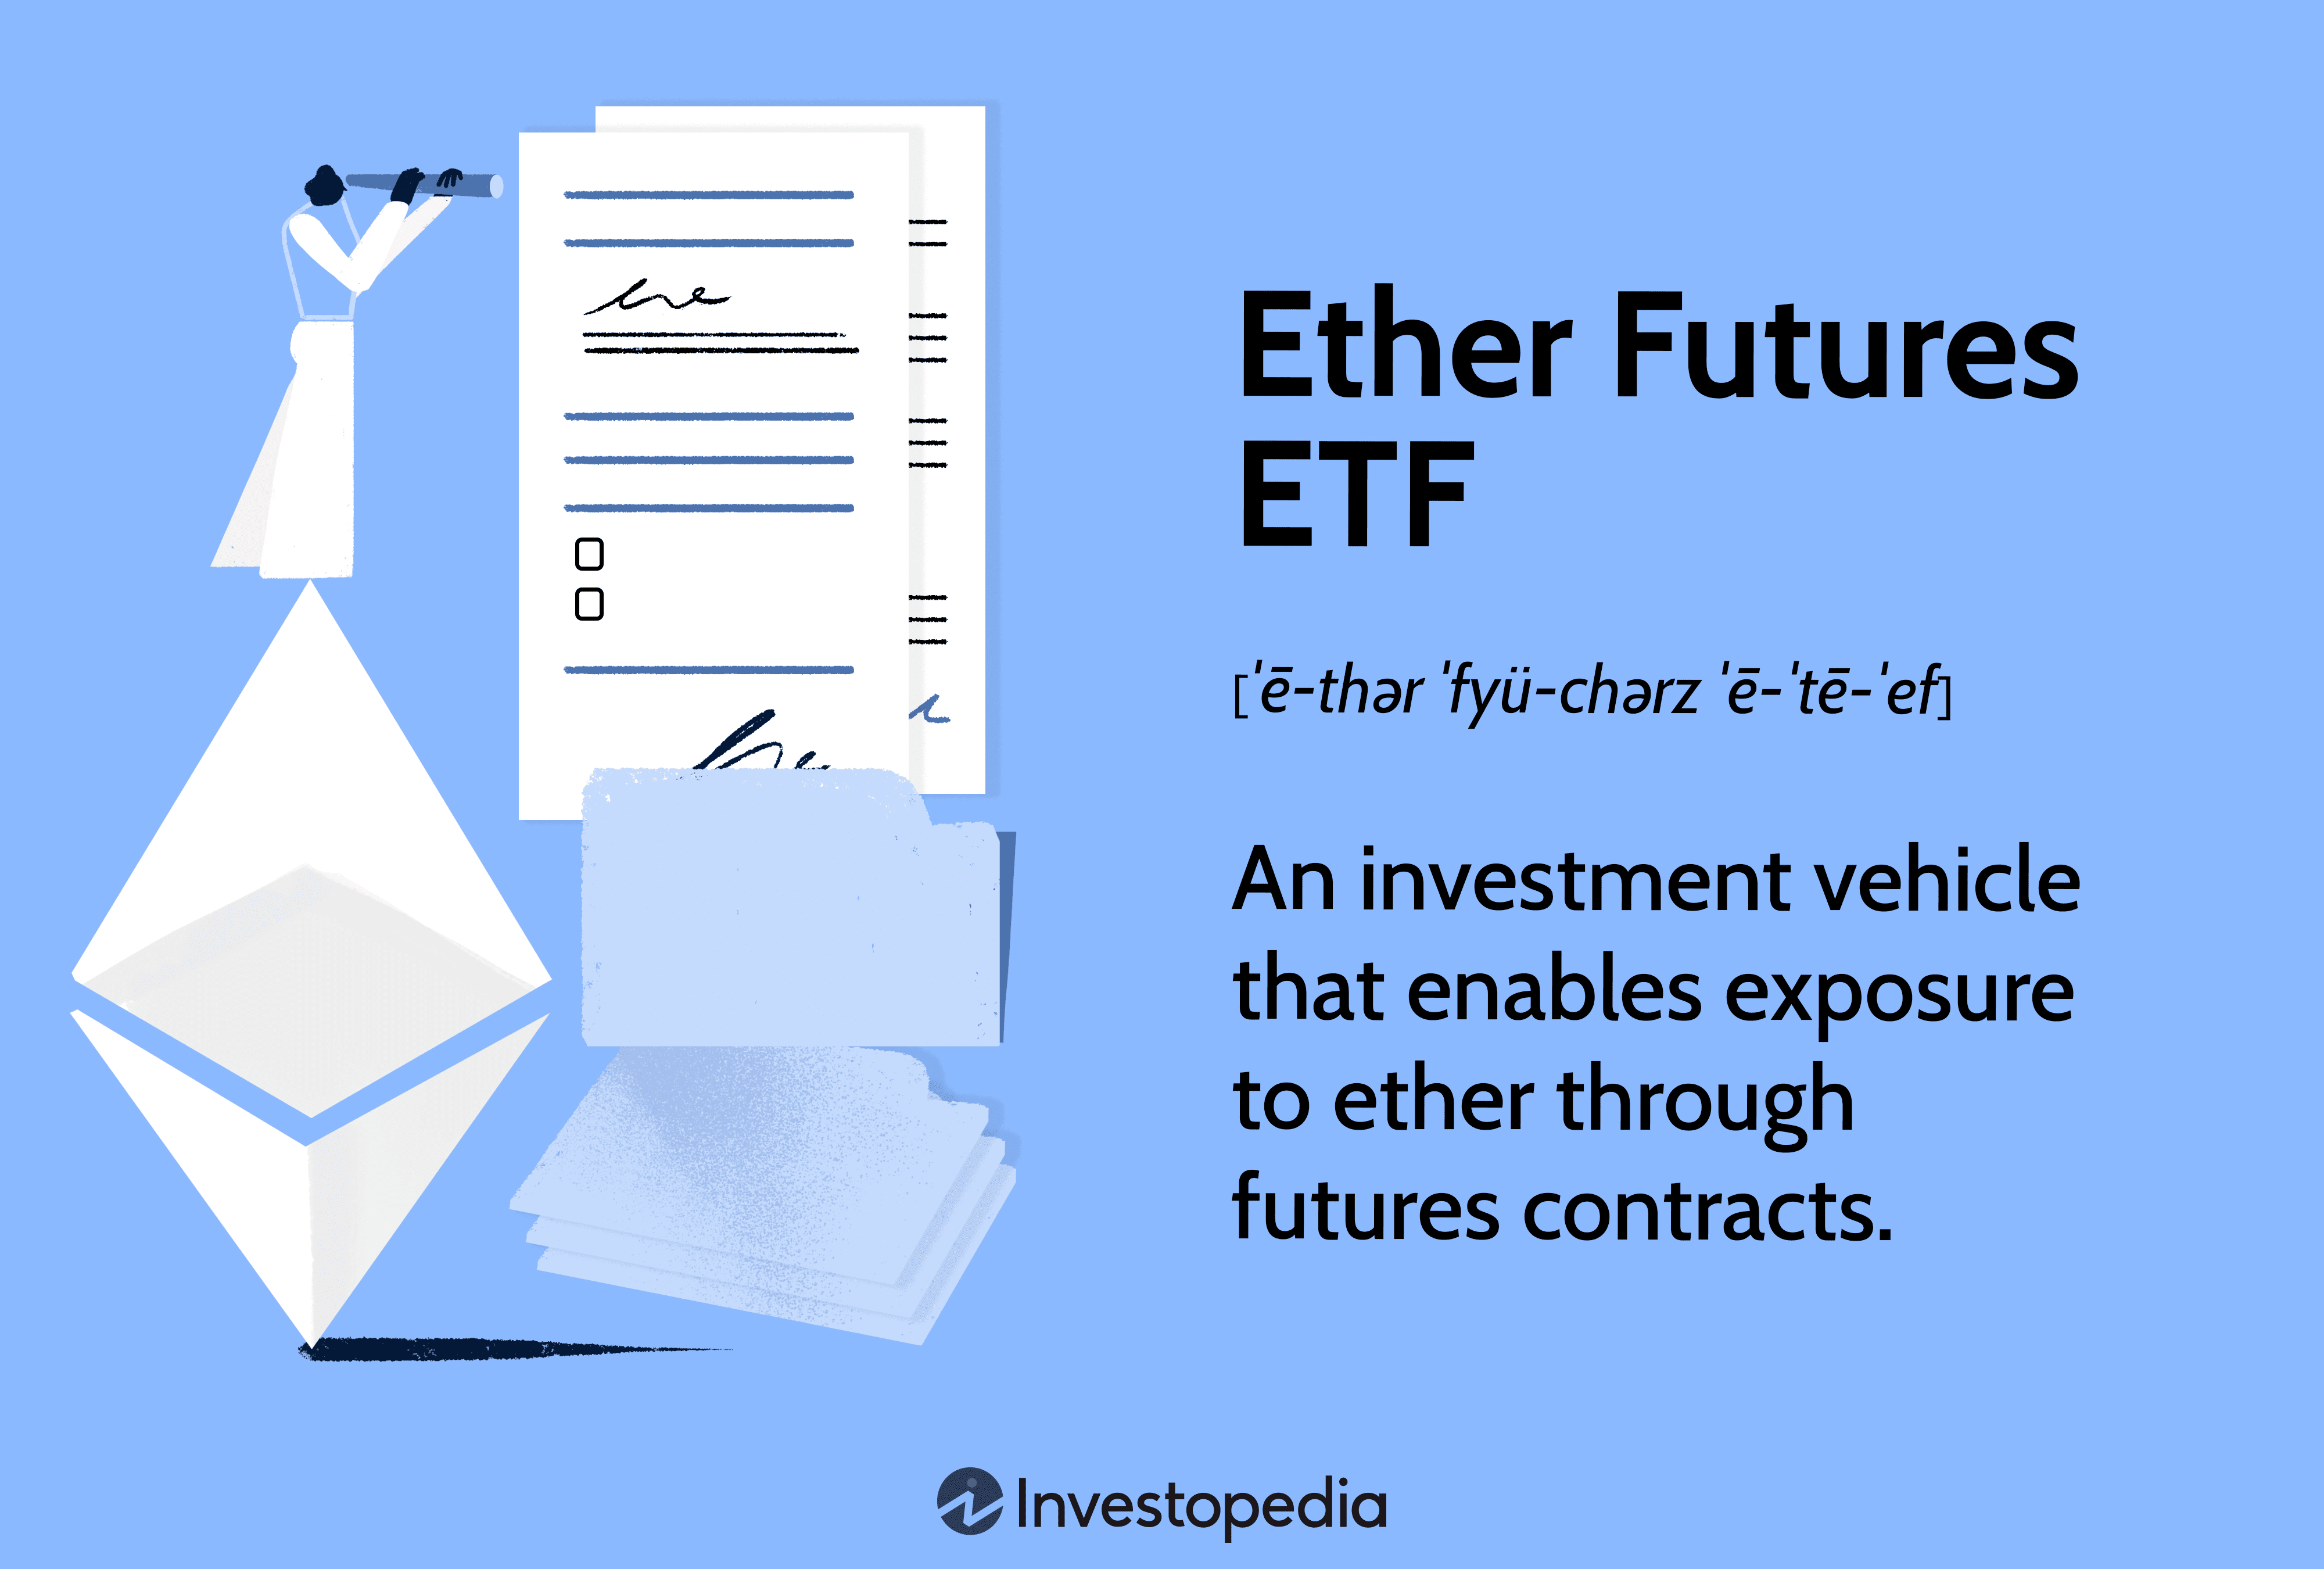 Ether Futures ETF: An investment vehicle that enables exposure to ether through futures contracts.